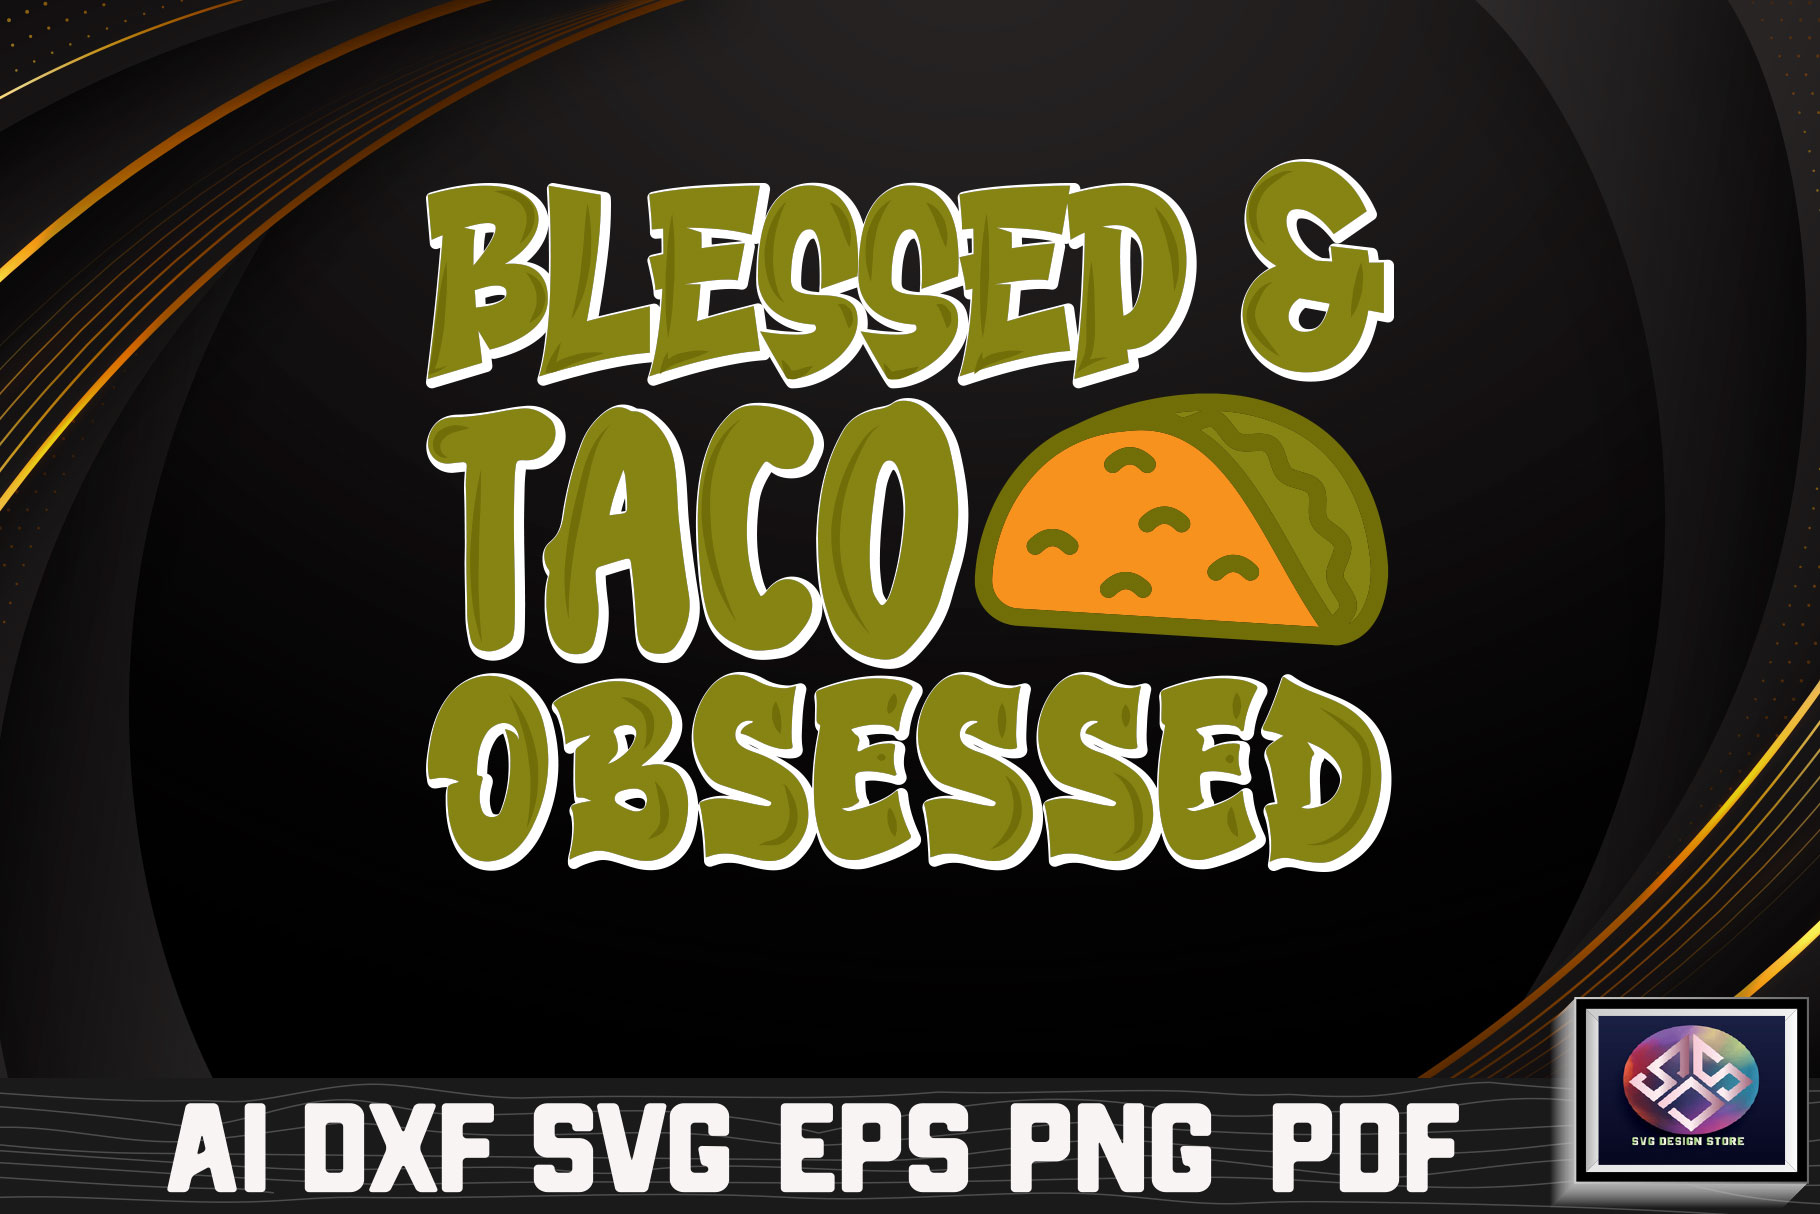 Black background with a yellow and green taco on it.